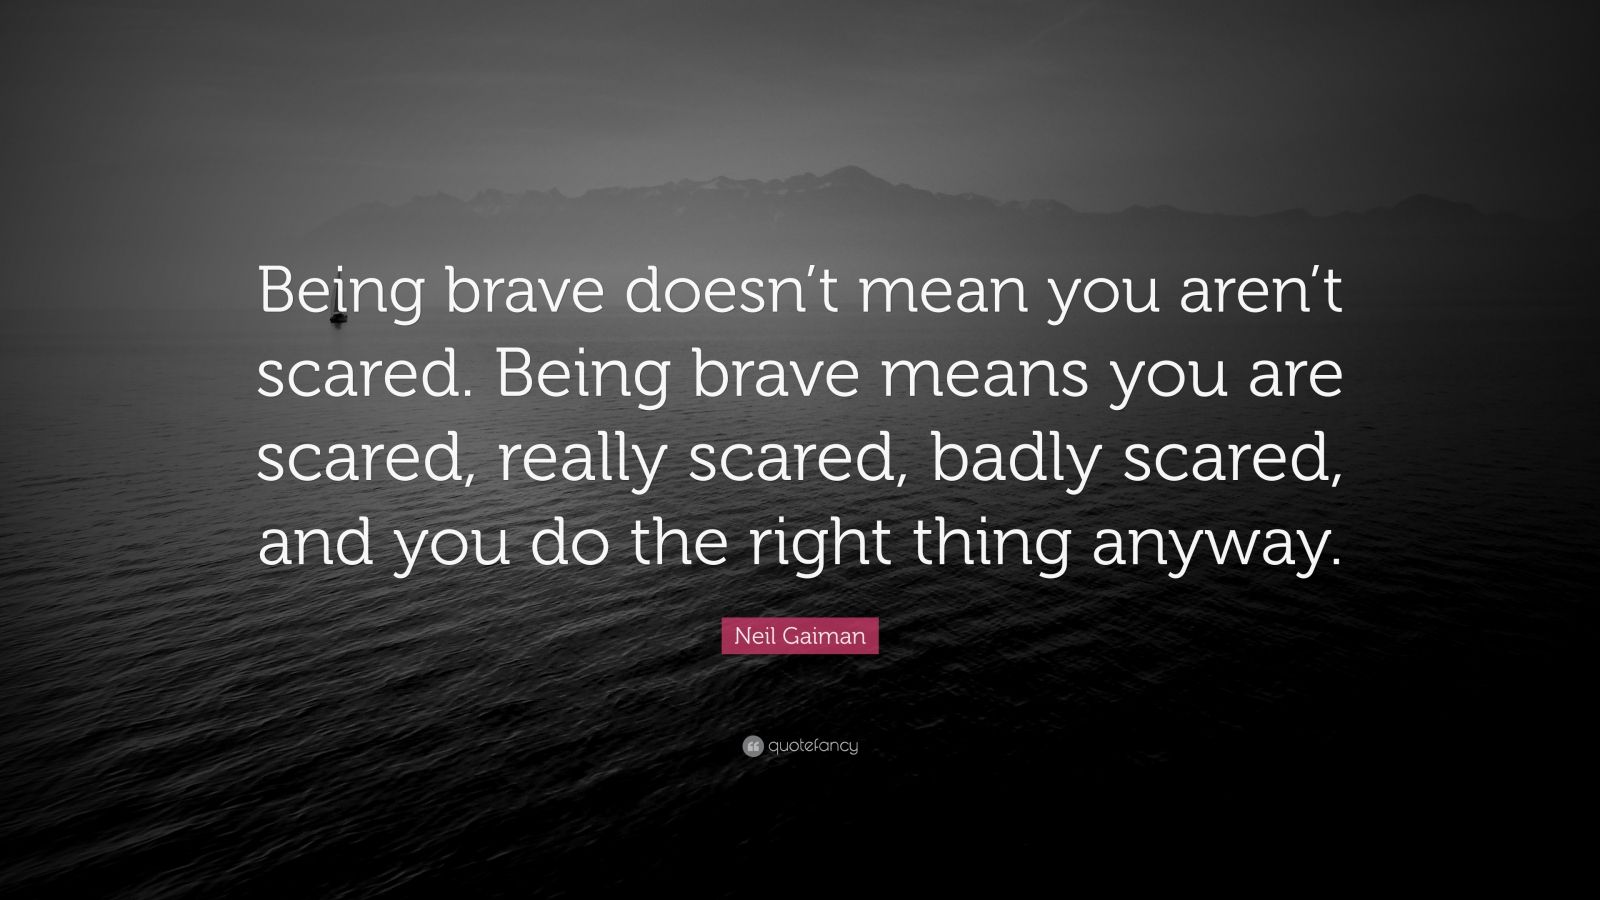 Neil Gaiman Quote: “Being brave doesn’t mean you aren’t scared. Being